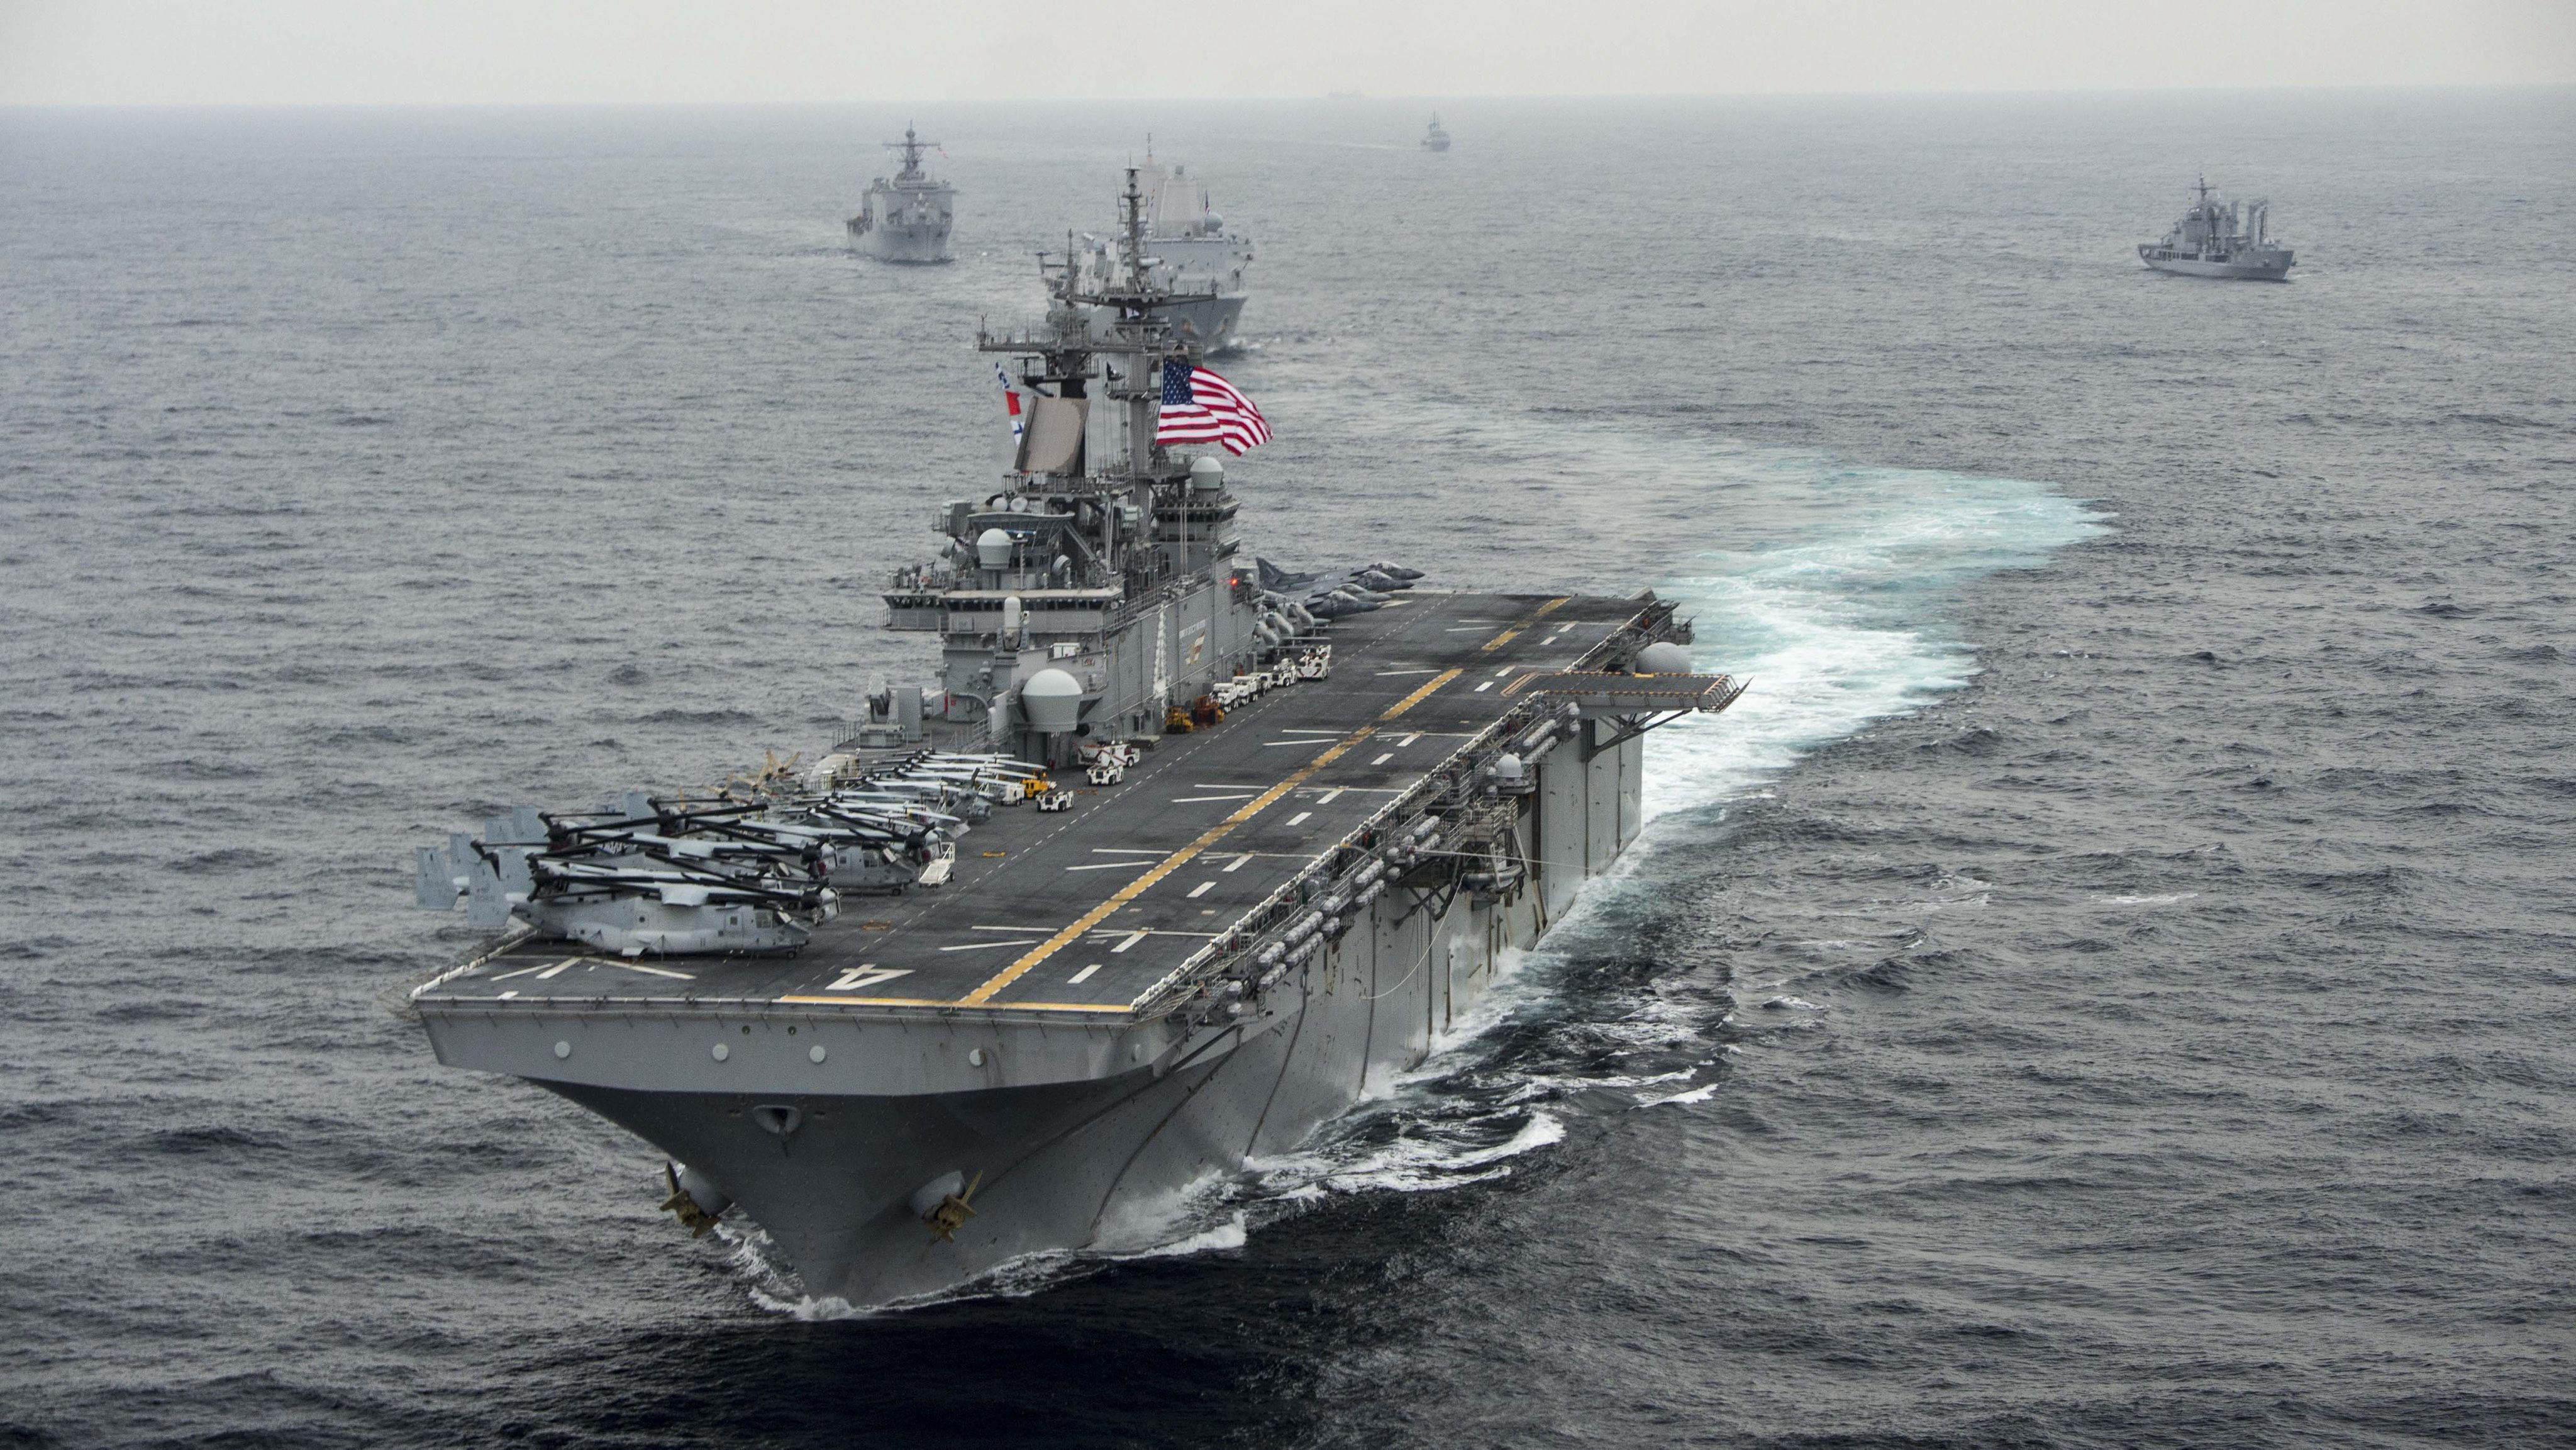 epa07725933 (FILE) - A handout photo made available by the US Navy Media Content Operations on shows the USS Boxer (LHD-4), a Wasp-class amphibious assault ship, transiting the East Sea during Exercise Ssang Yong, 08 March 2016(reissued 19 July 2019). According to media reports on 19 July, US President Donald Trump said, the USS Boxer shot down an Iranian drone after it came within a kilometer of the ship.  EPA/MCSN CRAIG Z. RODARTE / HANDOUT HANDOUT  HANDOUT EDITORIAL USE ONLY/NO SALES